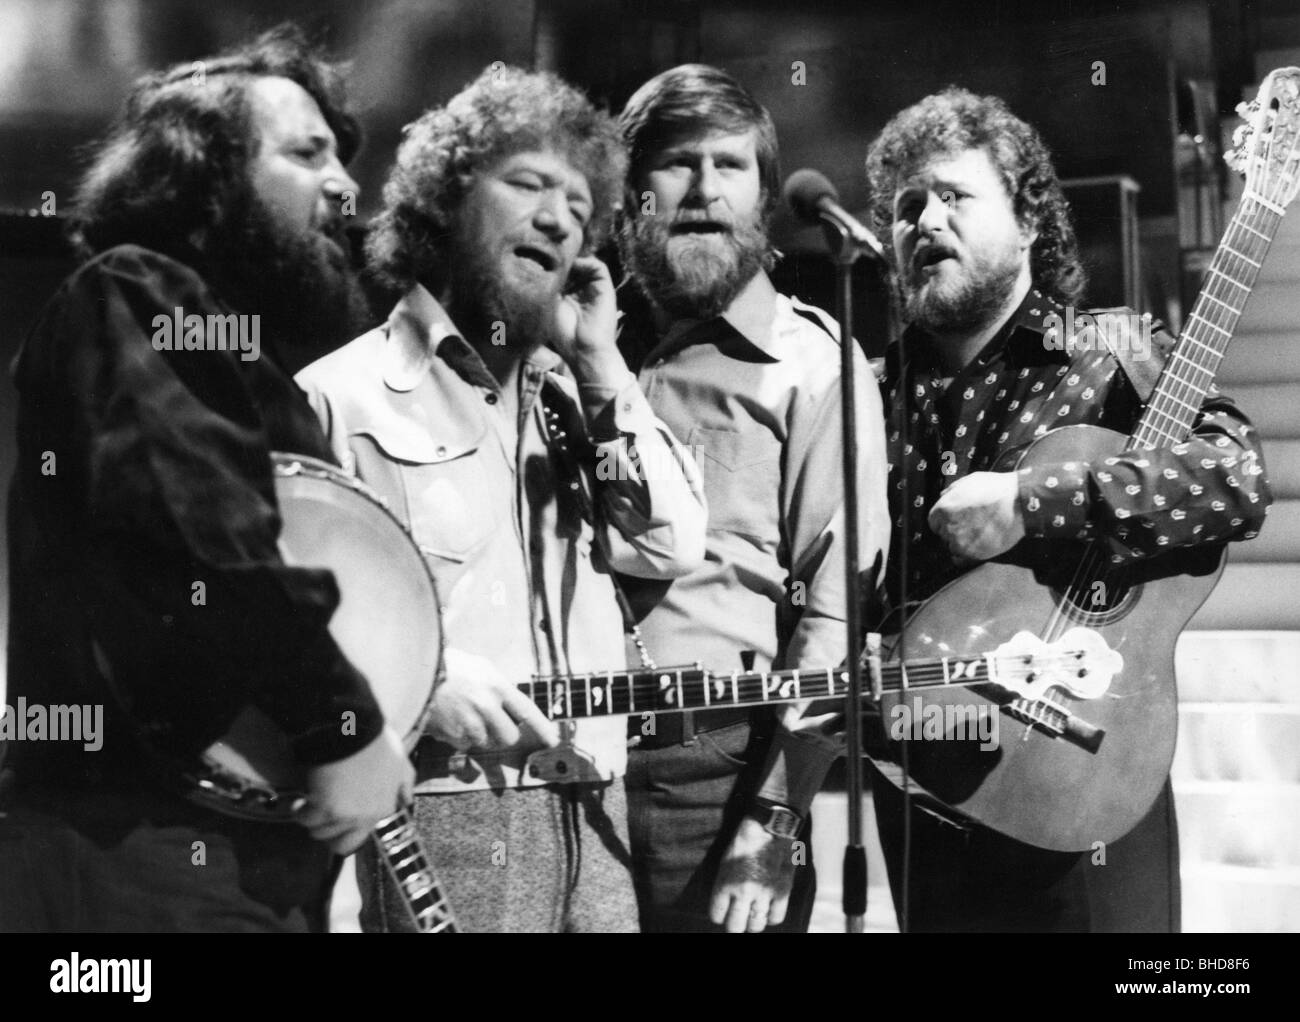 Dubliners, The, Irish folk band, group picture, on stage, 1970s, Stock Photo